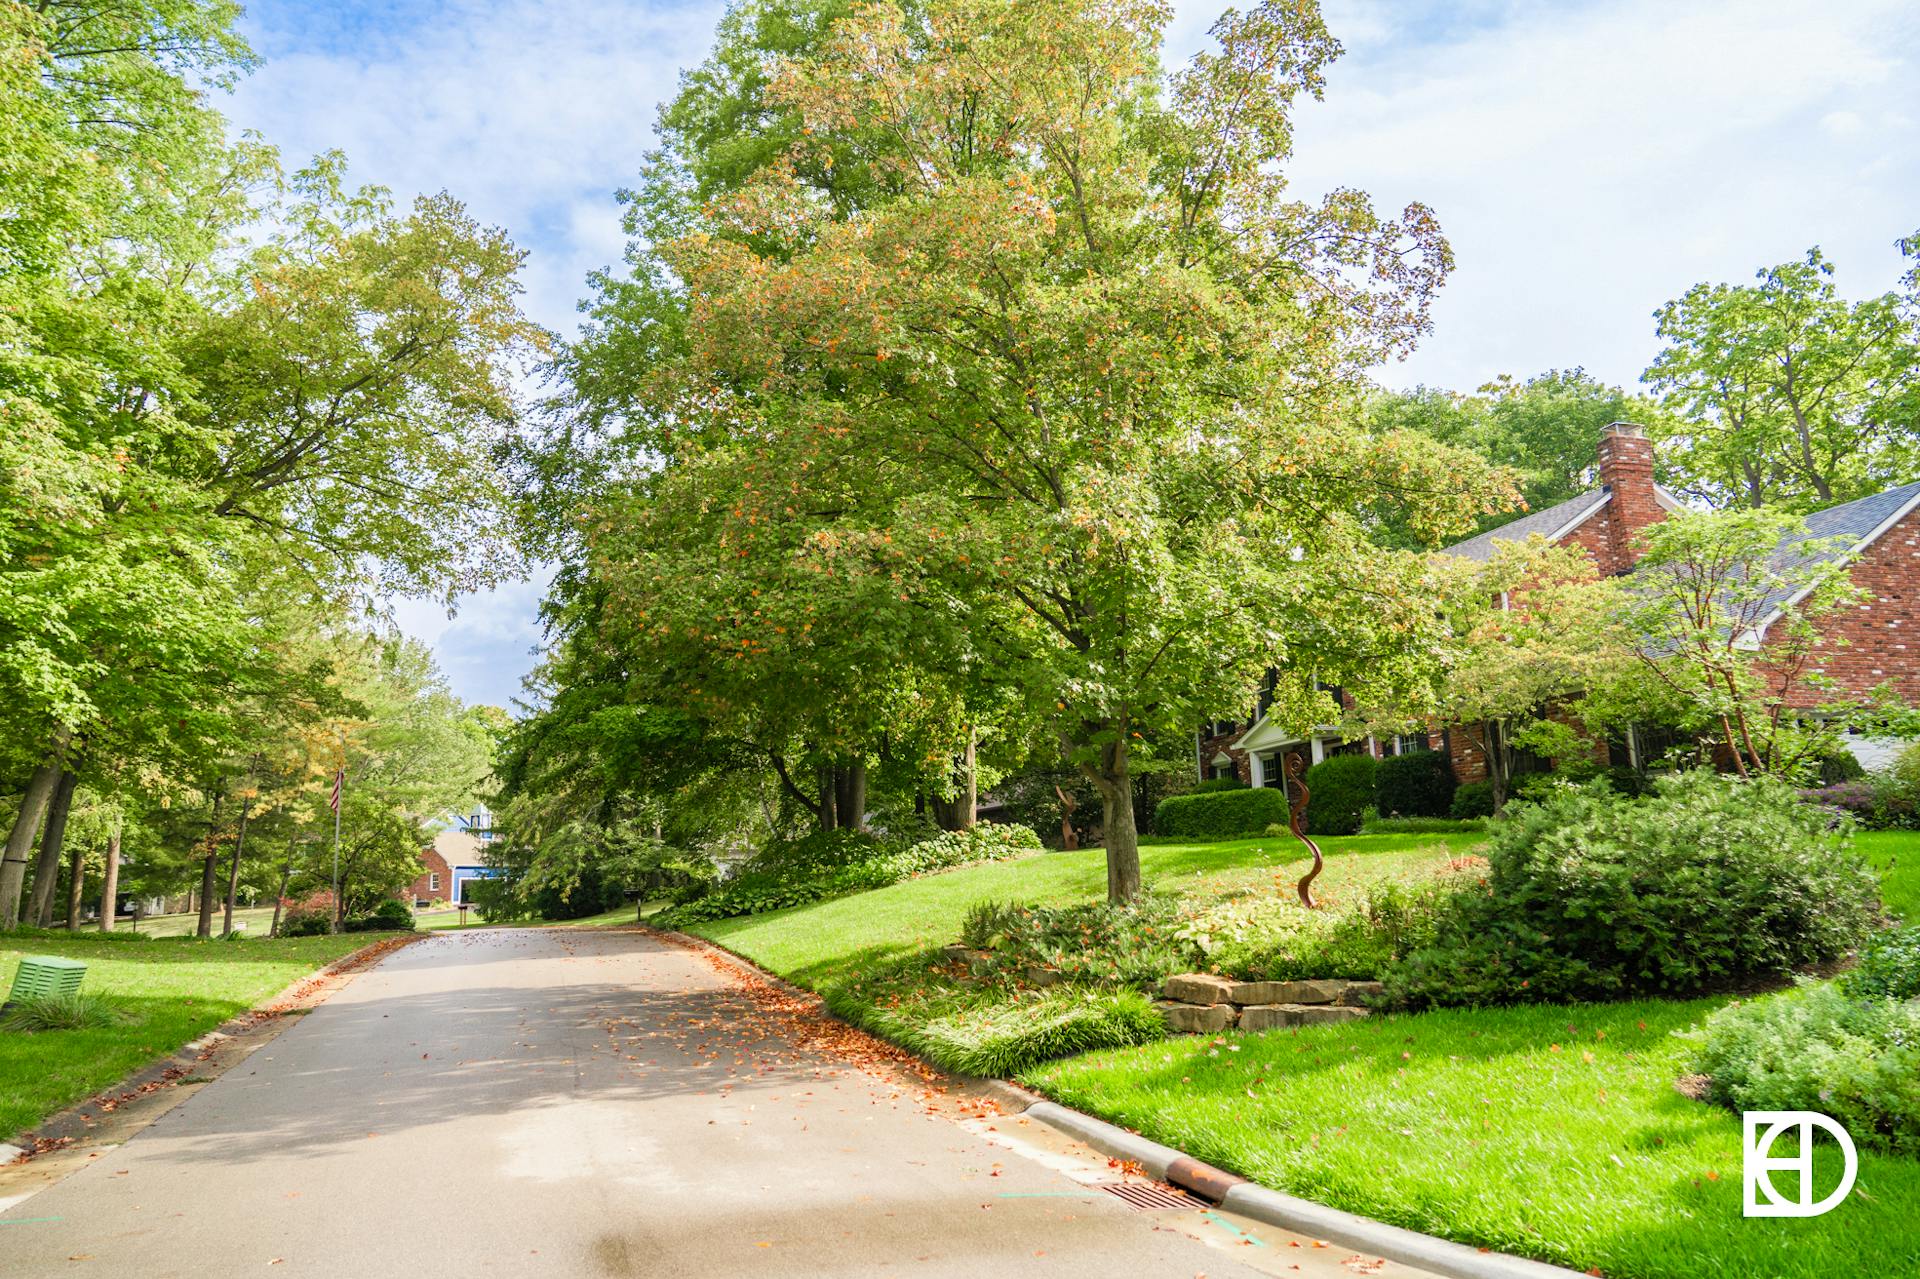 Photo of tree-lined street in Raintree Place neighborhood in Zionsville, Indiana.